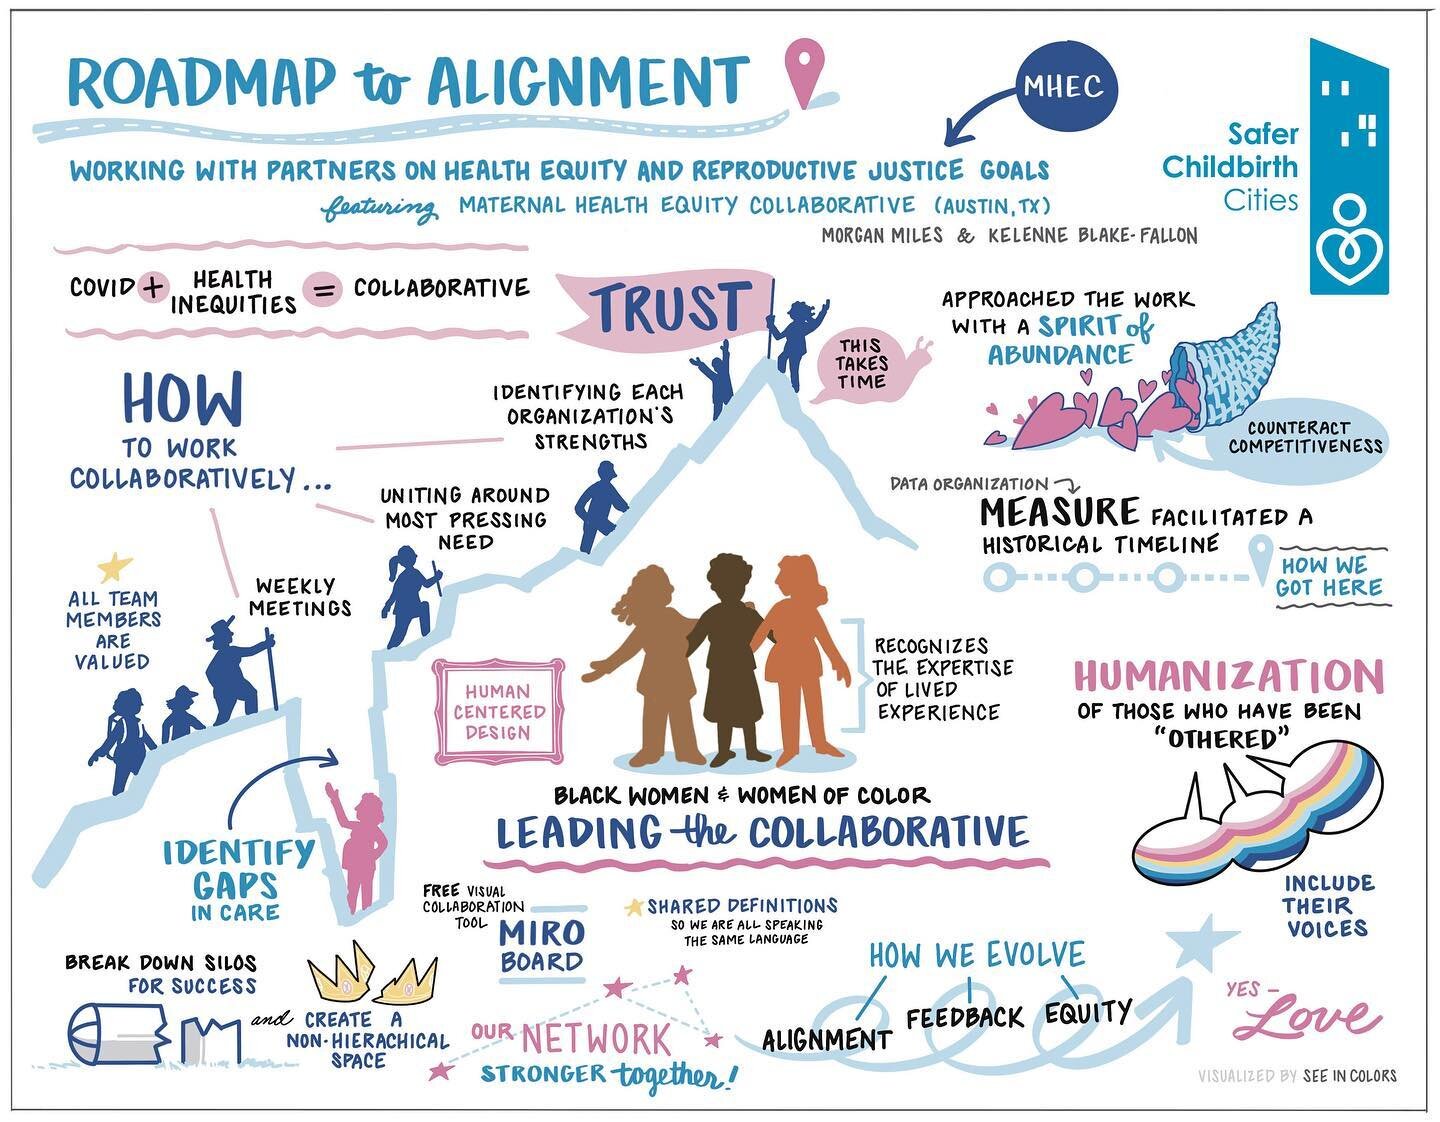 Today Kelenne and Morgan presented at the Safer Childbirth Cities Community of Practice Conference about how the MHEC built alignment and collaboration in our beginning days. This is a graphic the @betterbirthoutcomes team created while listening to 